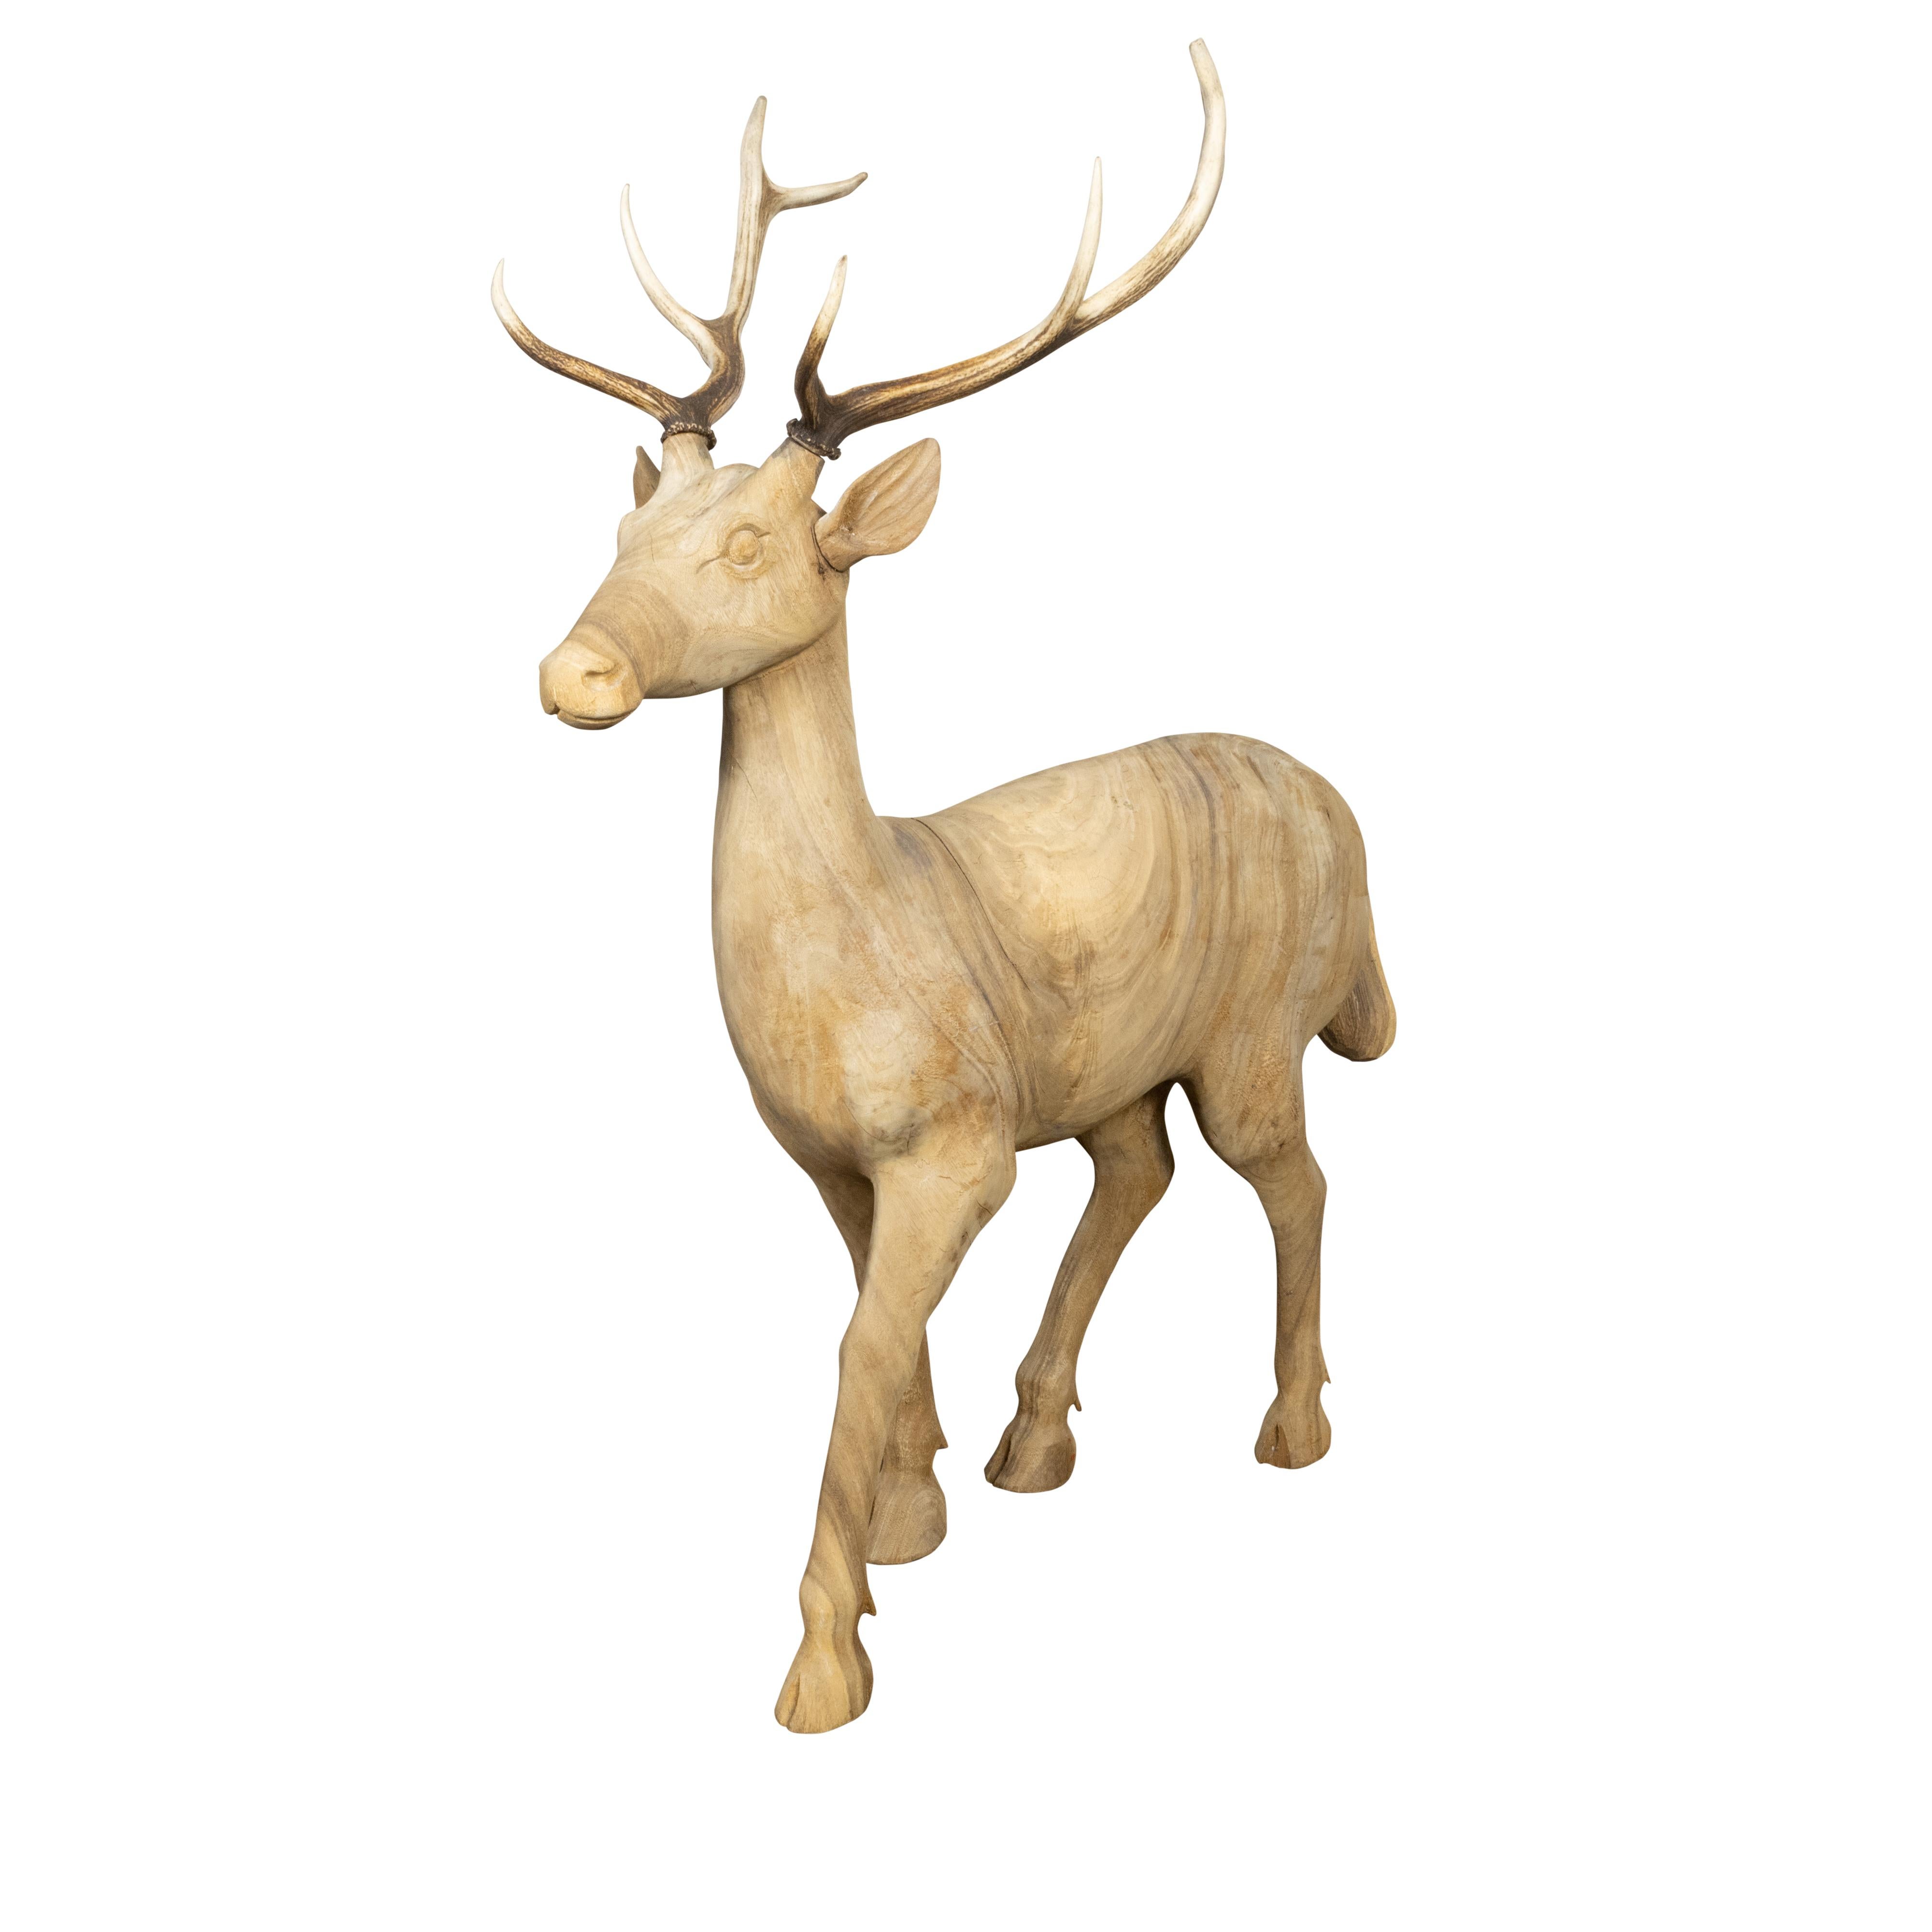 Vintage Midcentury Sculpture of a Walking Stag with Antlers and Natural Patina In Good Condition For Sale In Atlanta, GA